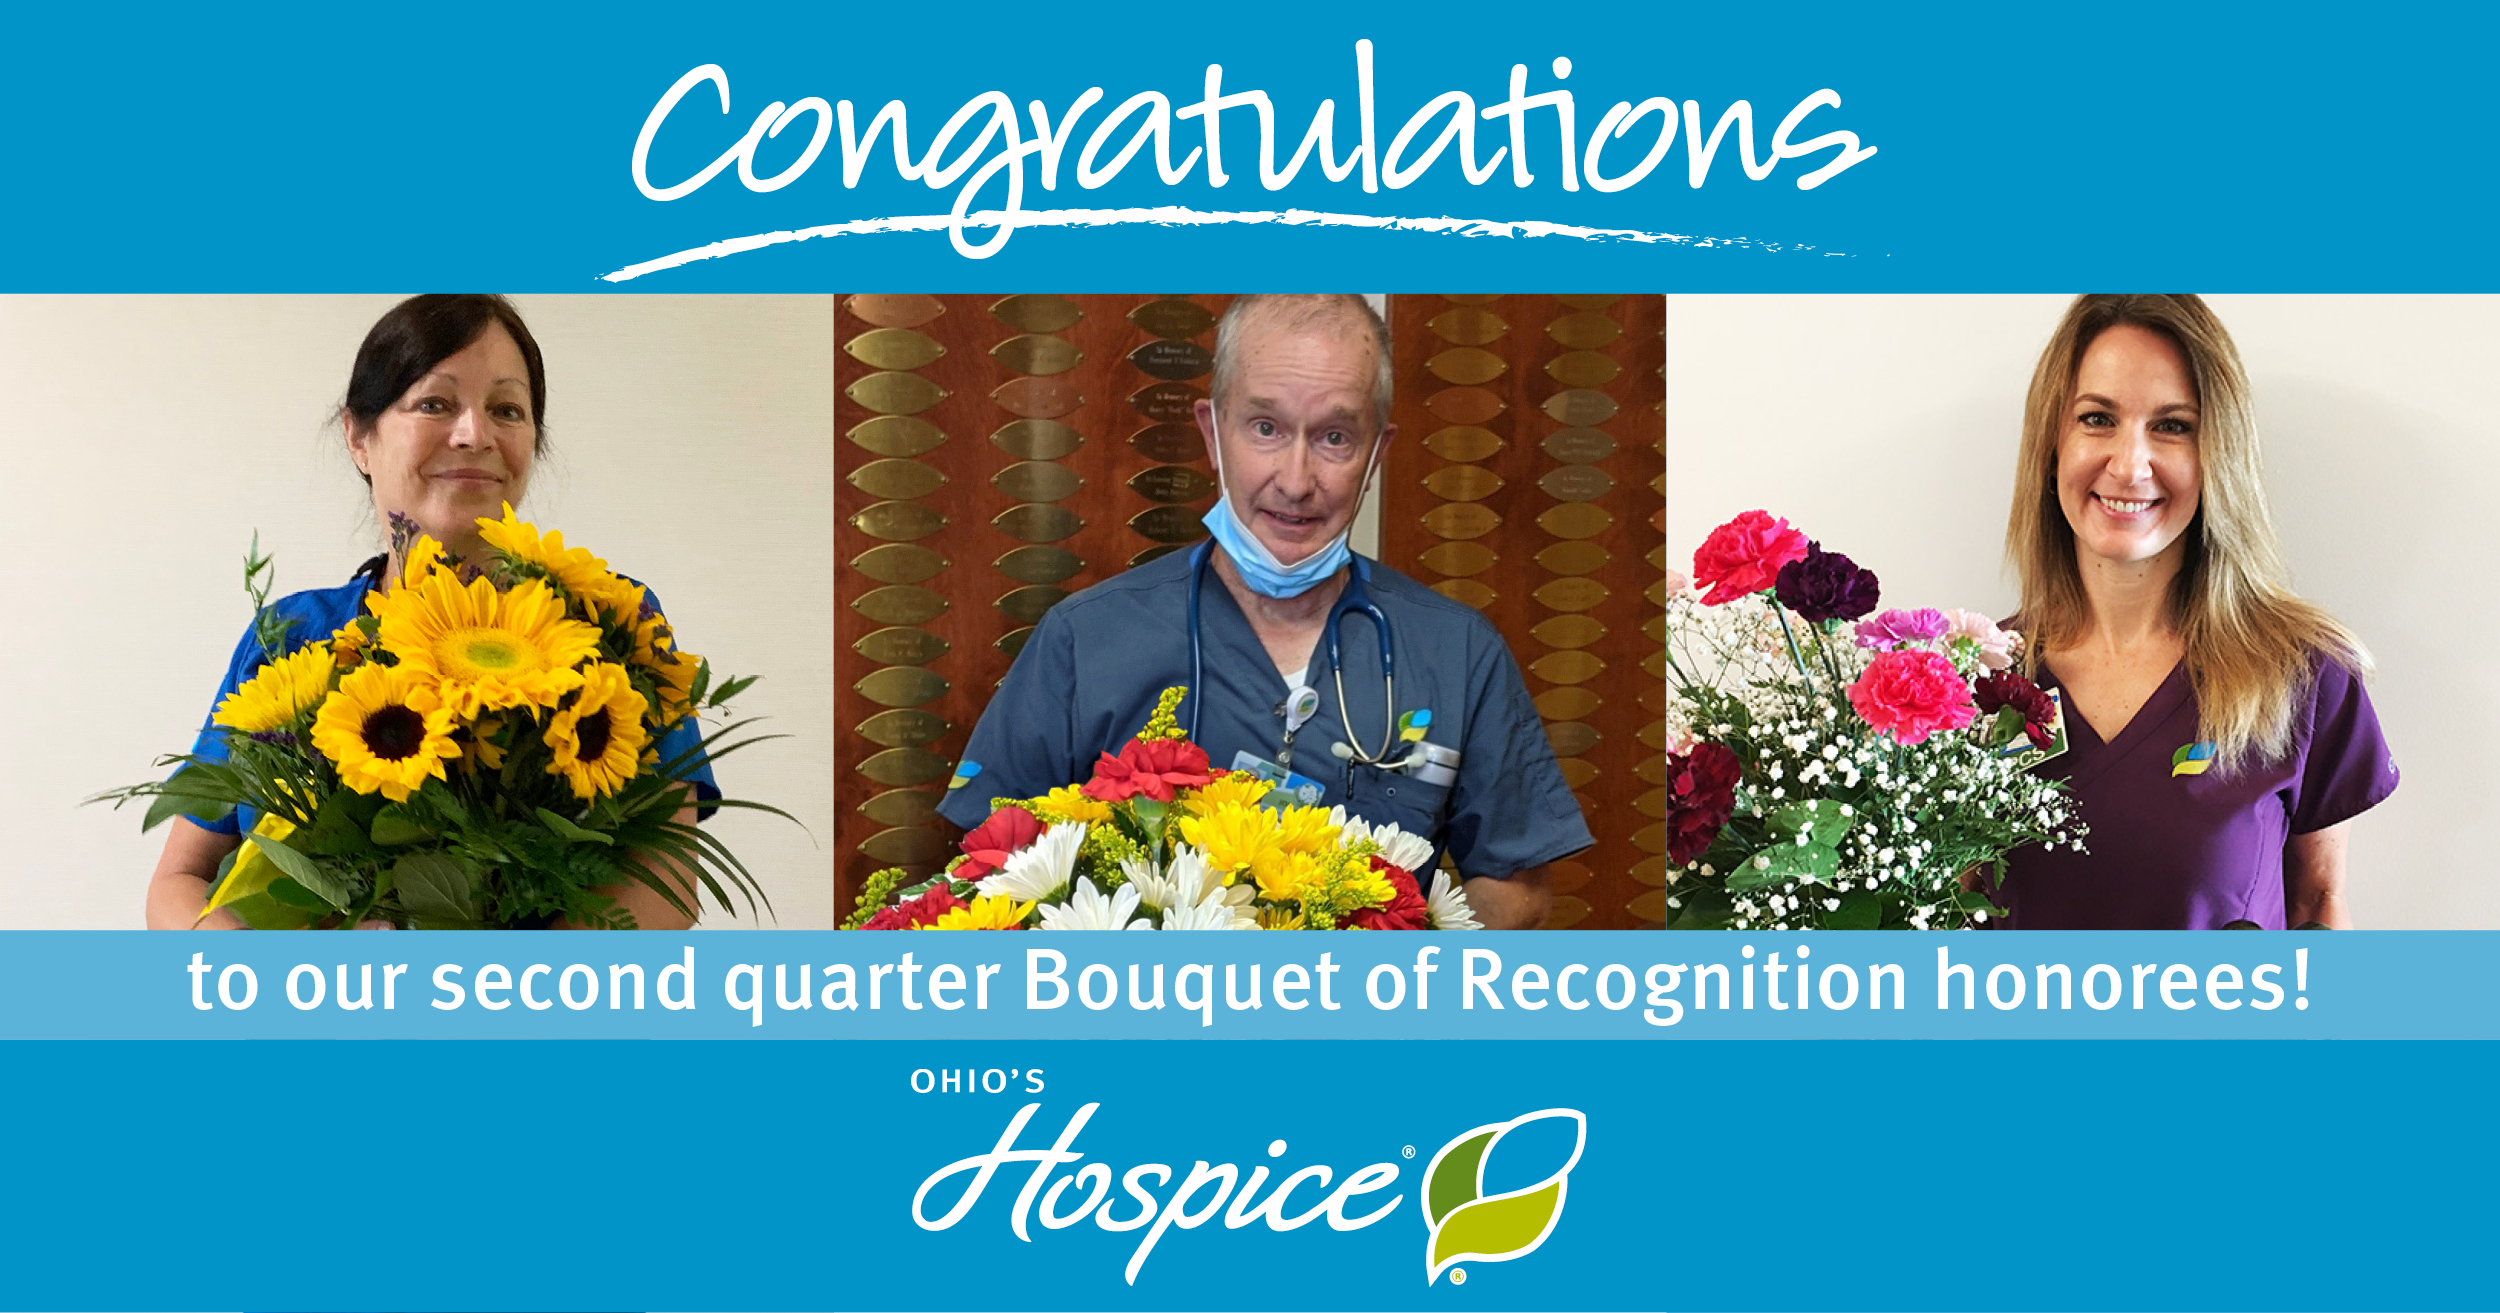 Congratulations to our second quarter Bouquet of Recognition honorees!